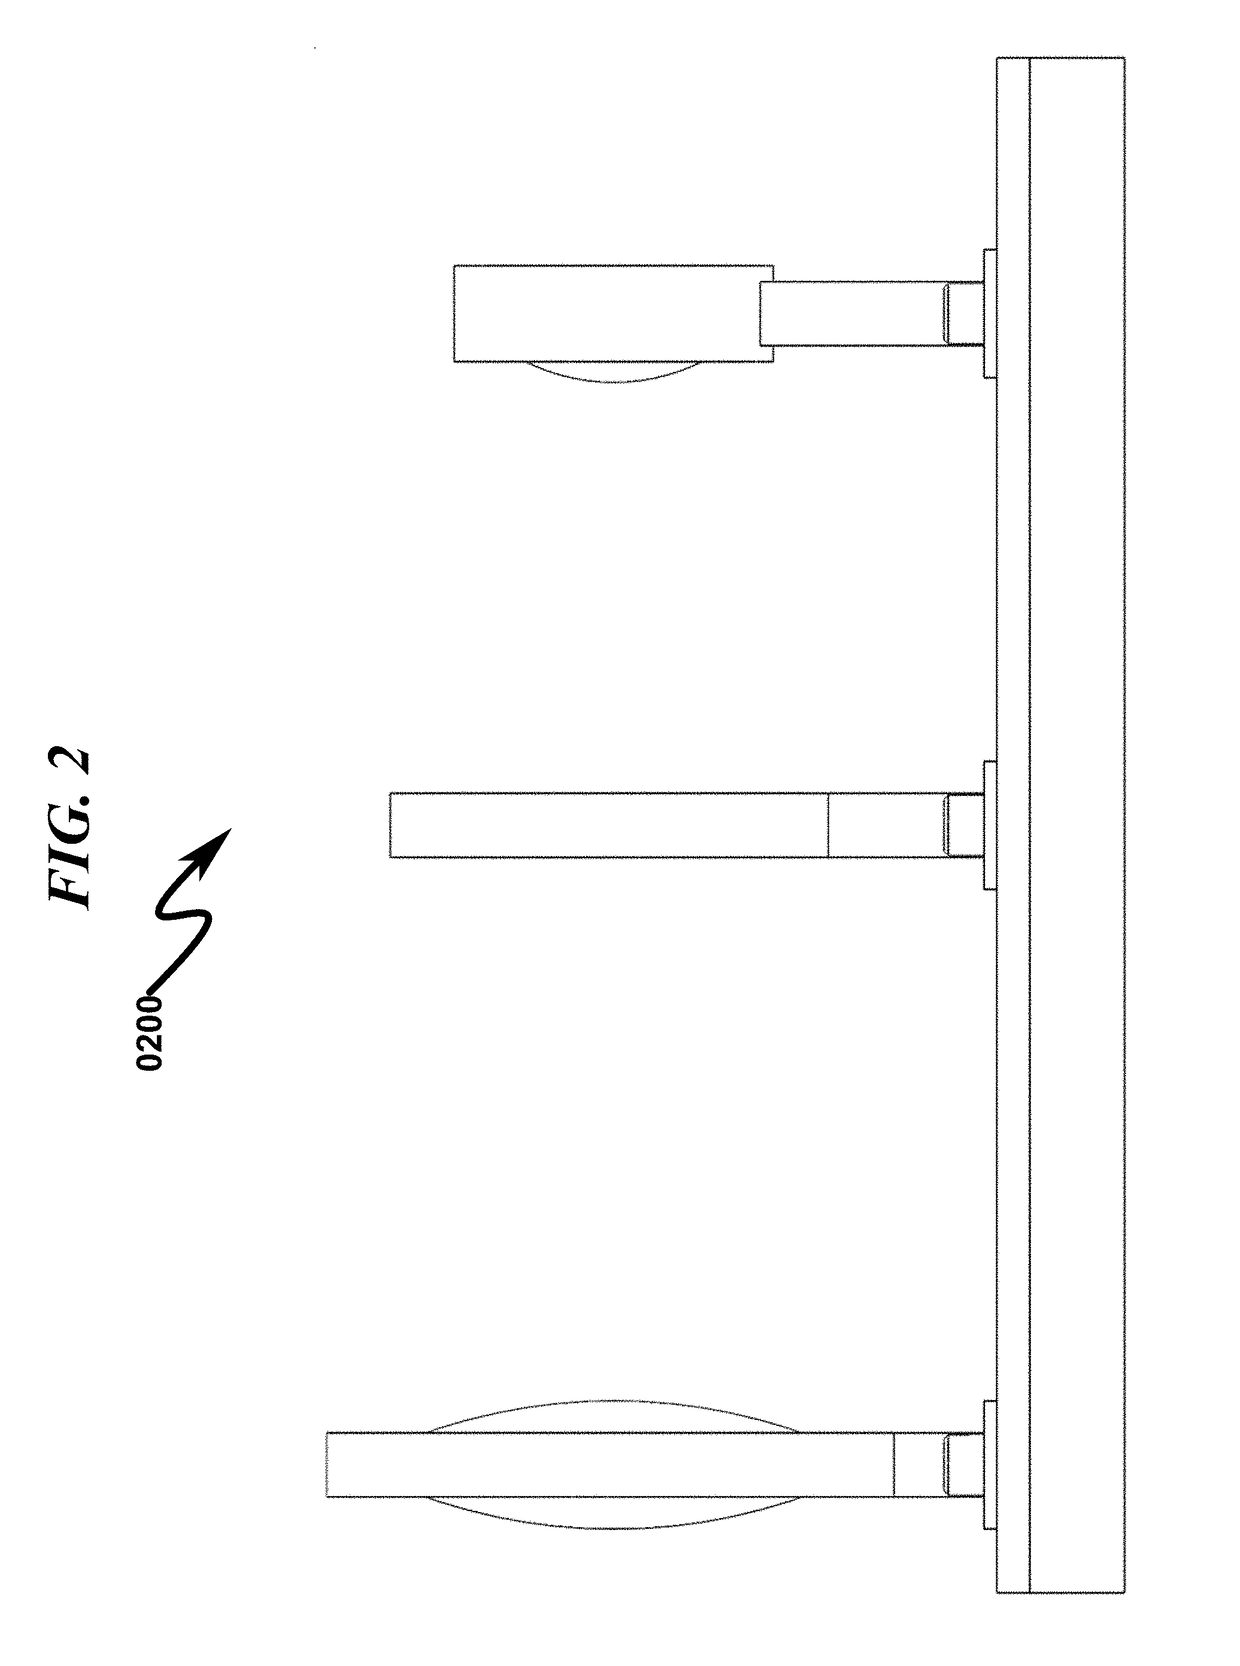 Lens Alignment System and Method